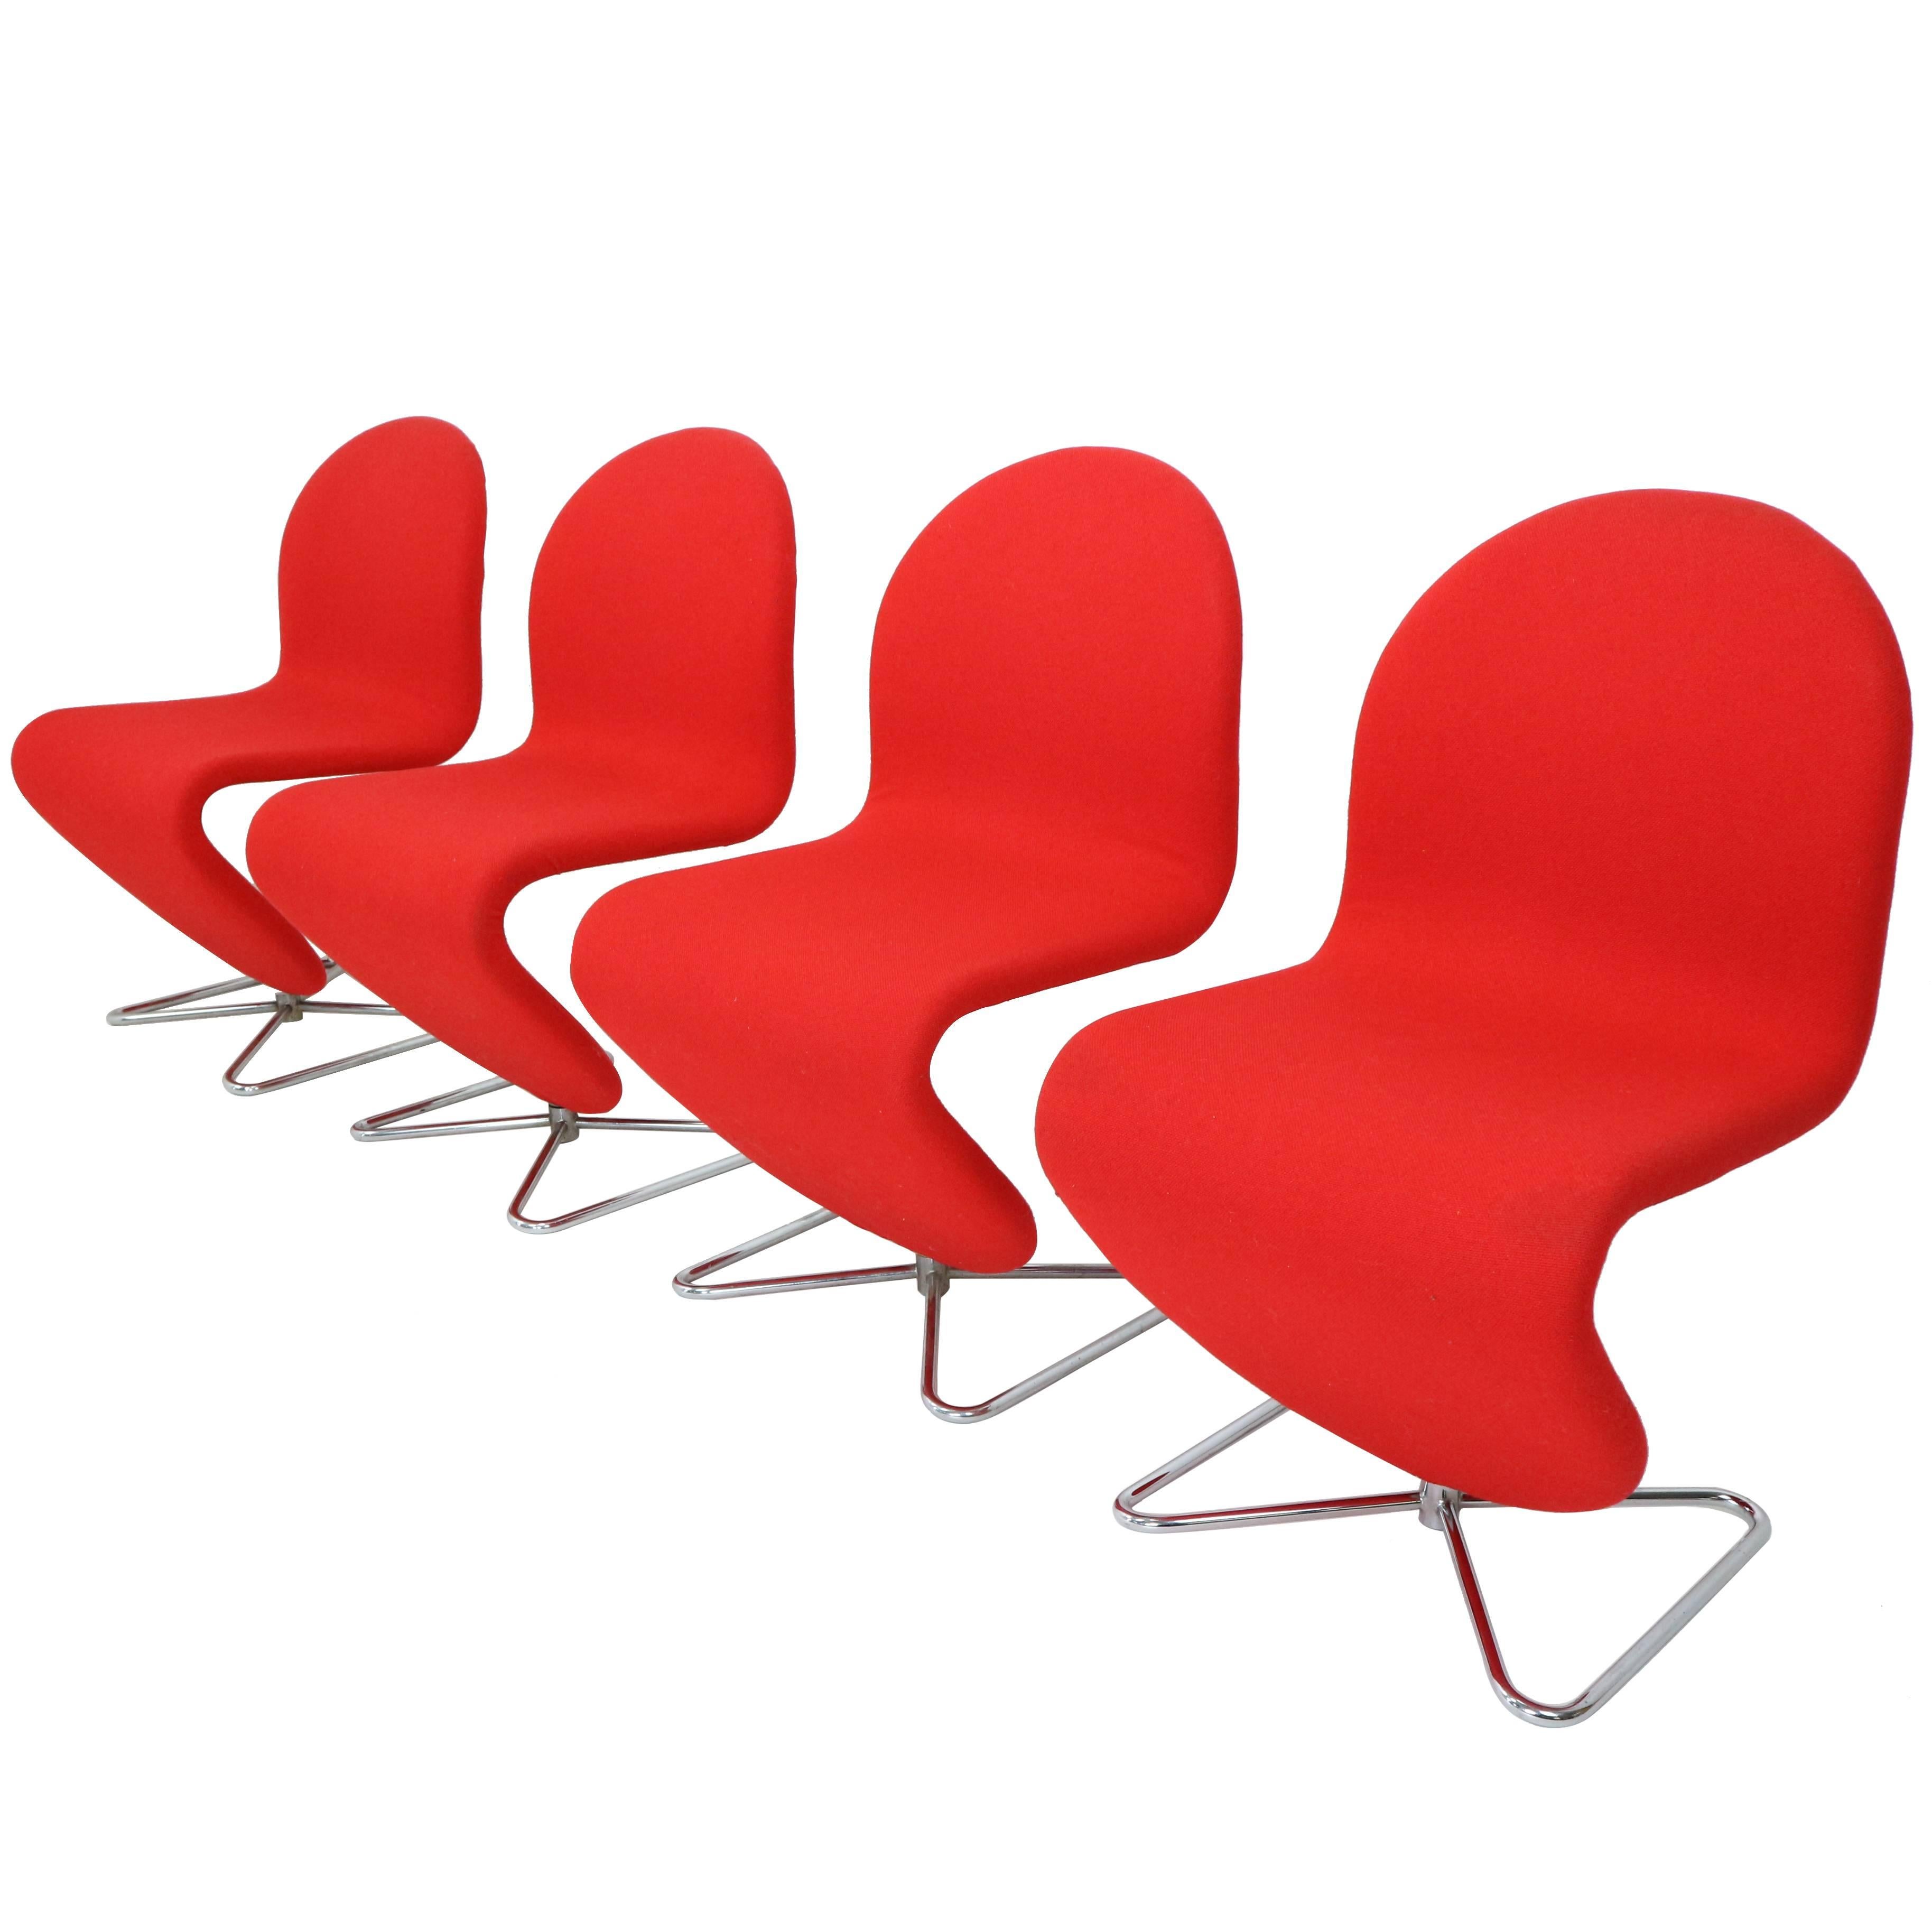 Verner Panton 123 Chairs by for Fritz Hansen, 1973, Set of Four